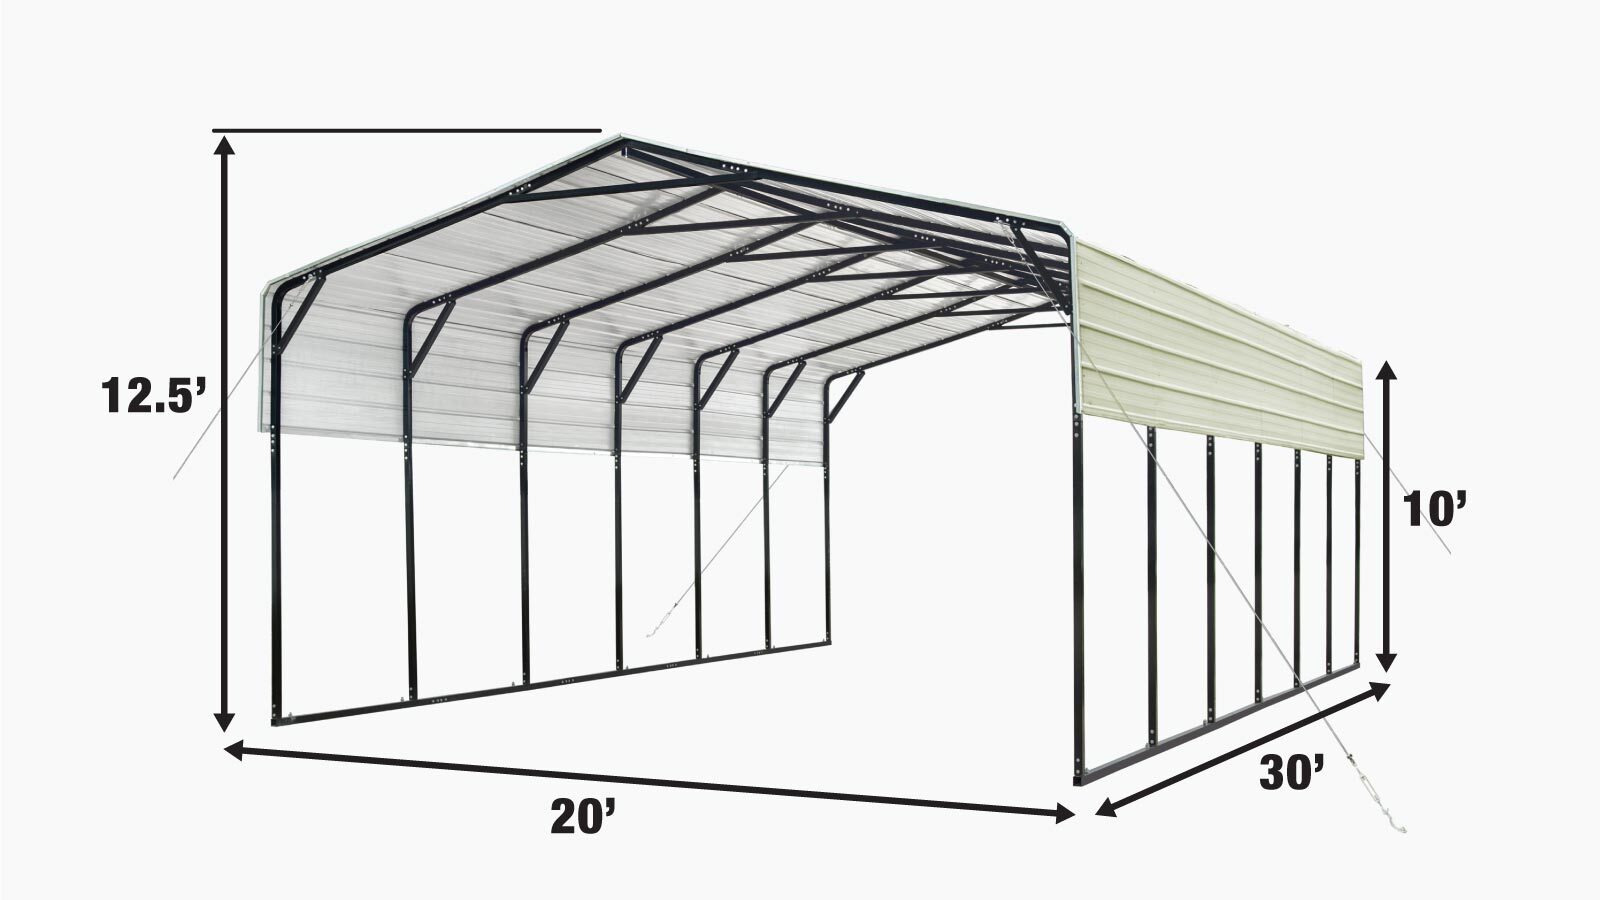 TMG Industrial 20’ x 30’ All-Steel Carport w/10’ Open Sidewalls, Galvanized Roof, Powder Coated, Polyester Paint Coating, Stabilizing Cables, TMG-CP2030-specifications-image